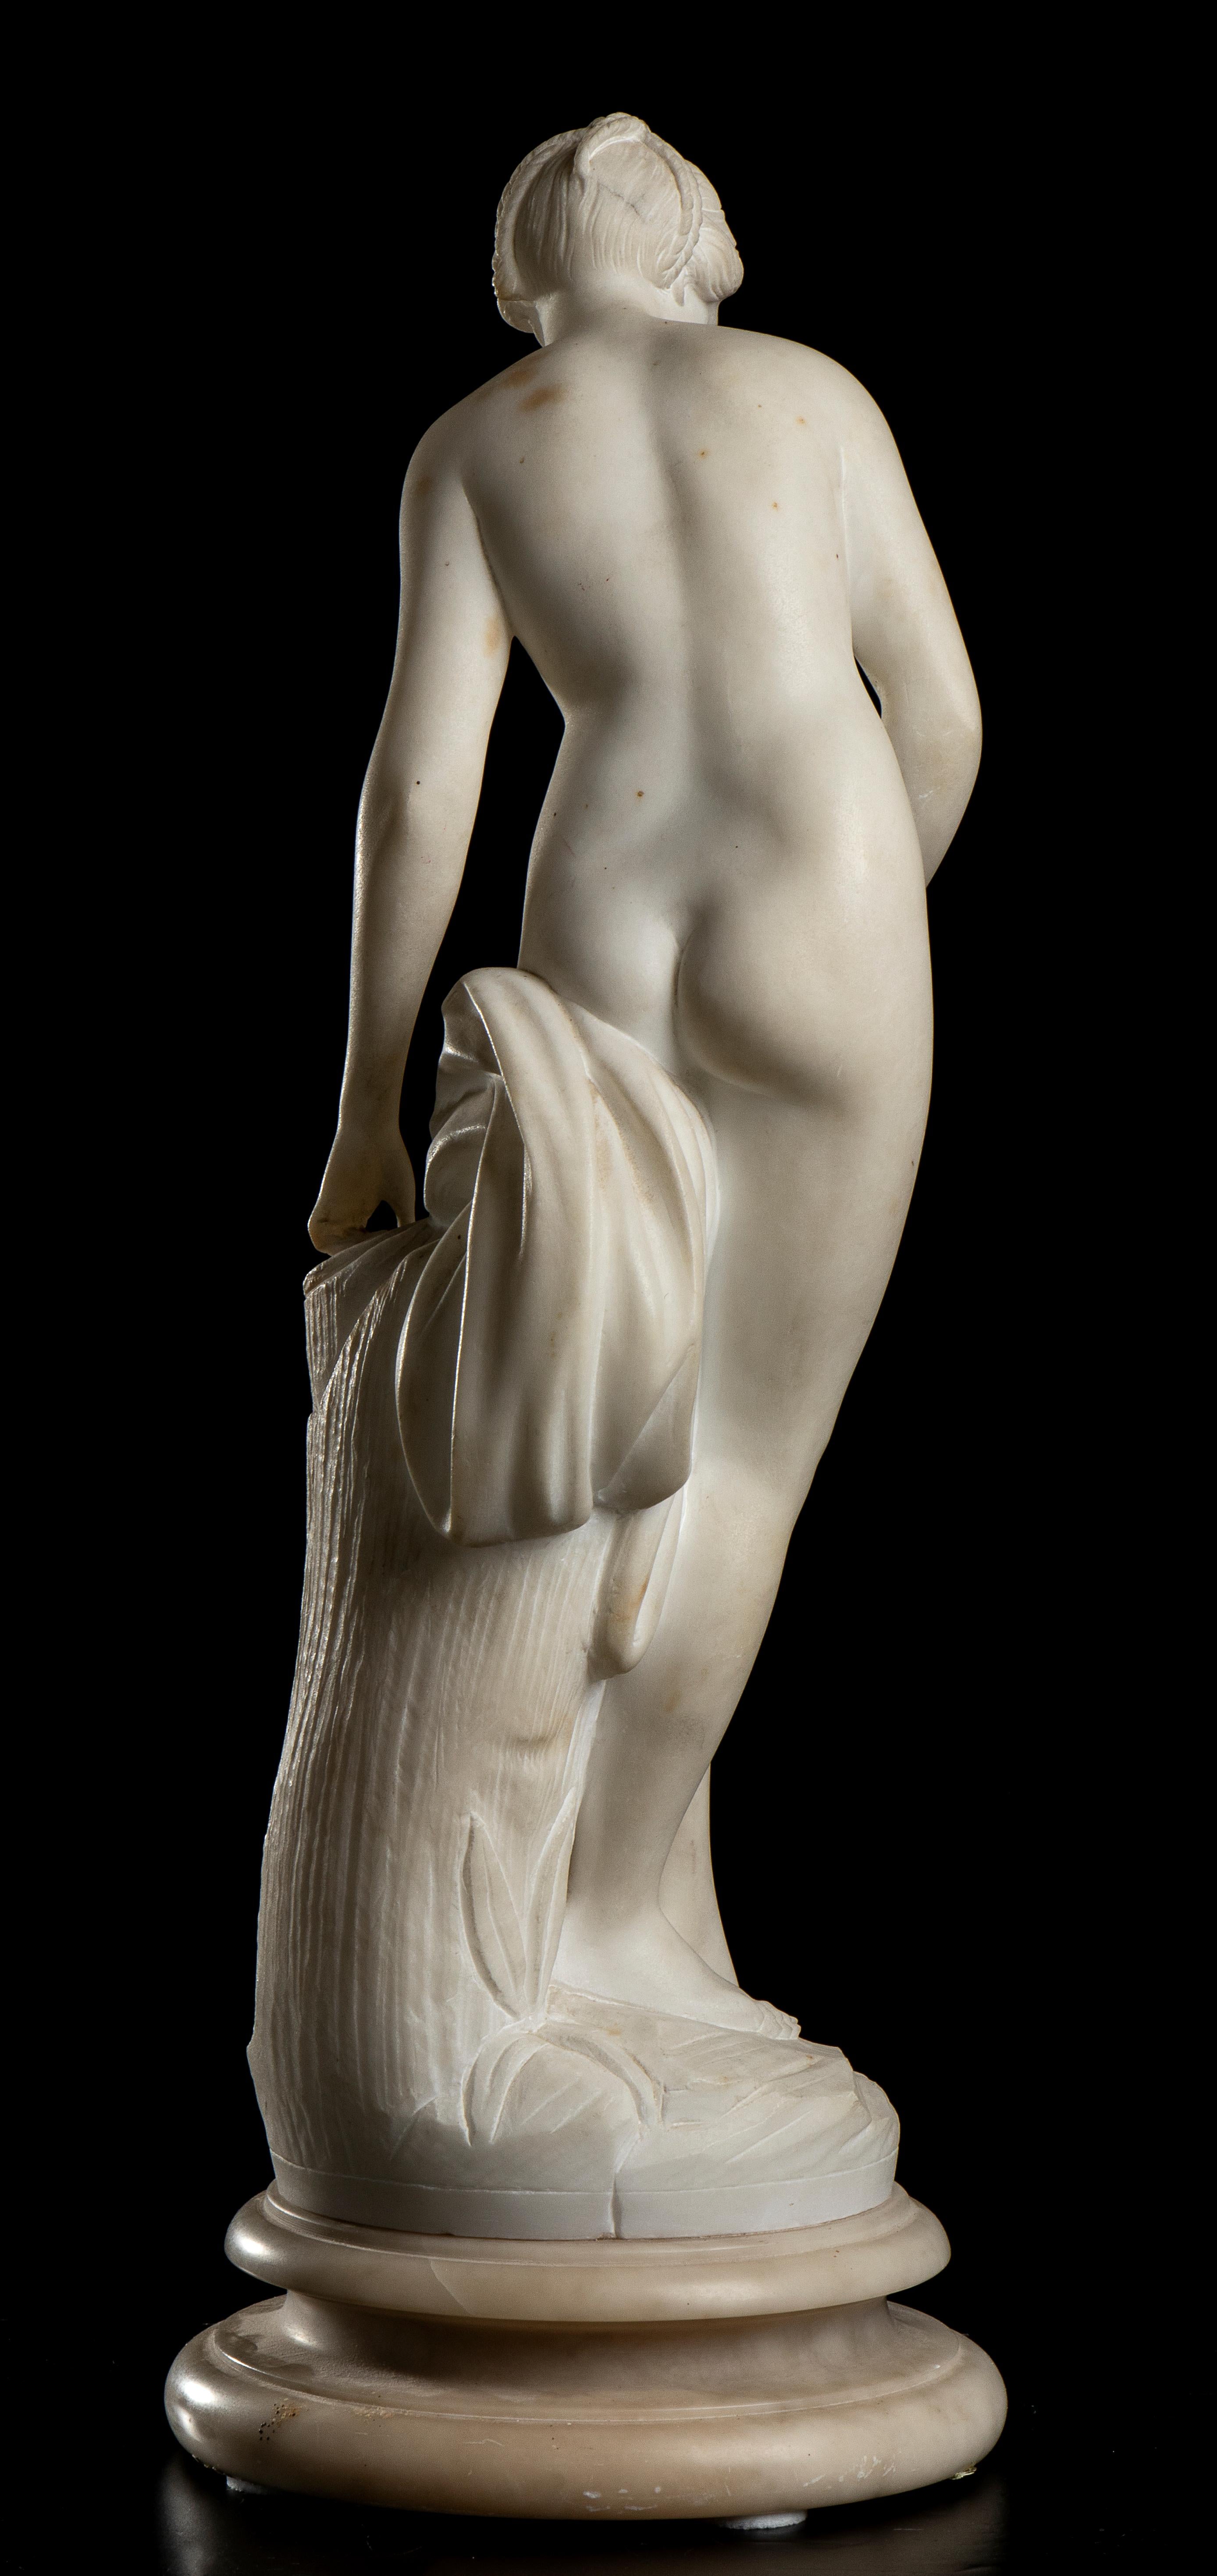 The sculpture a 19th Italian and probably tuscan work after the original opera of Étienne Maurice Falconet , represents a young woman taking a bath, identified with the goddess Aphrodite-Venus, portrayed in the act of diving into sacred waters; in